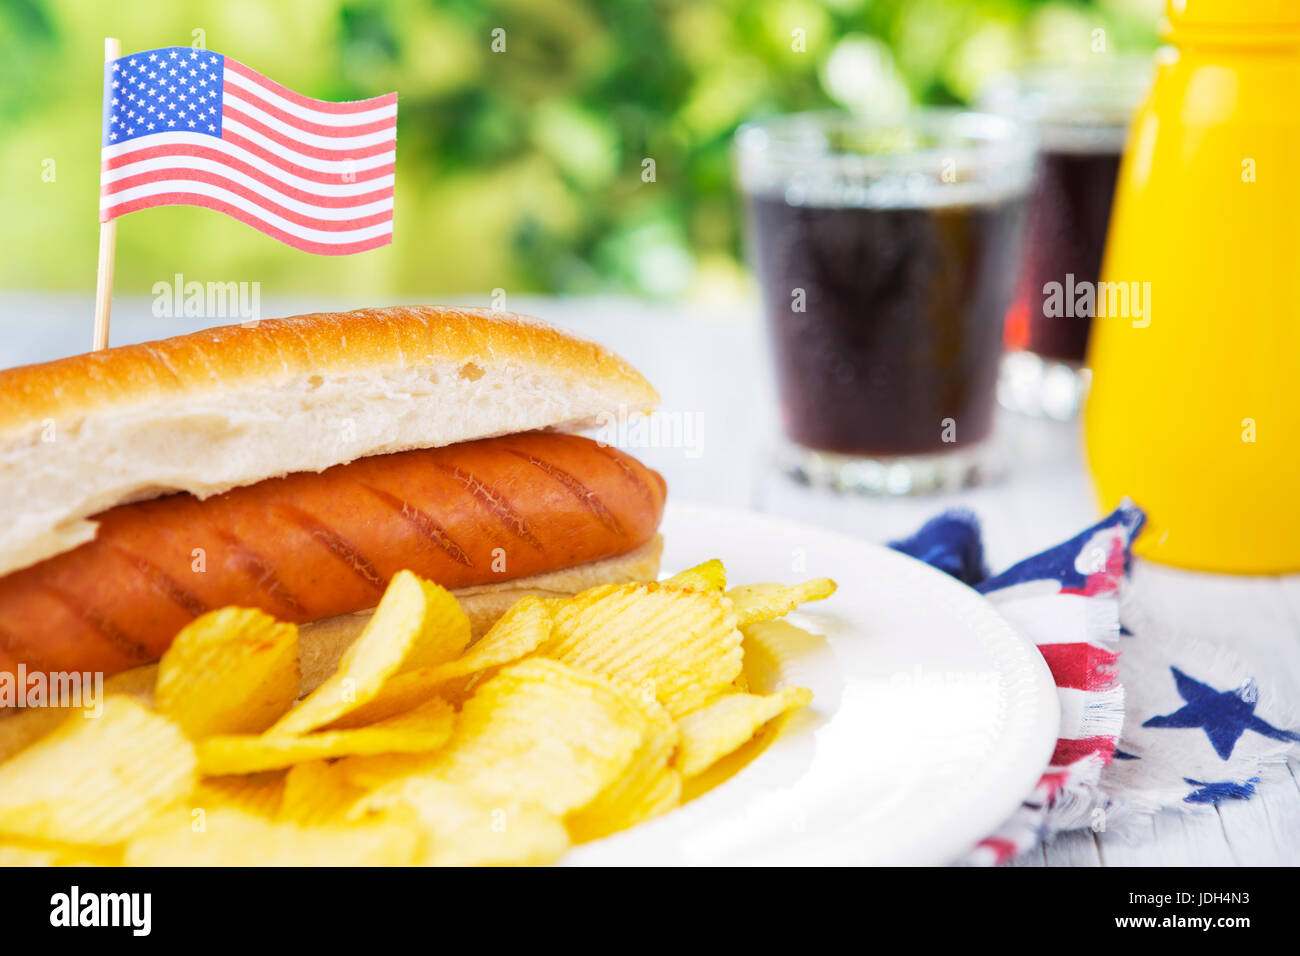 A tasty hot dog with potato chips on an outdoor table. Stock Photo